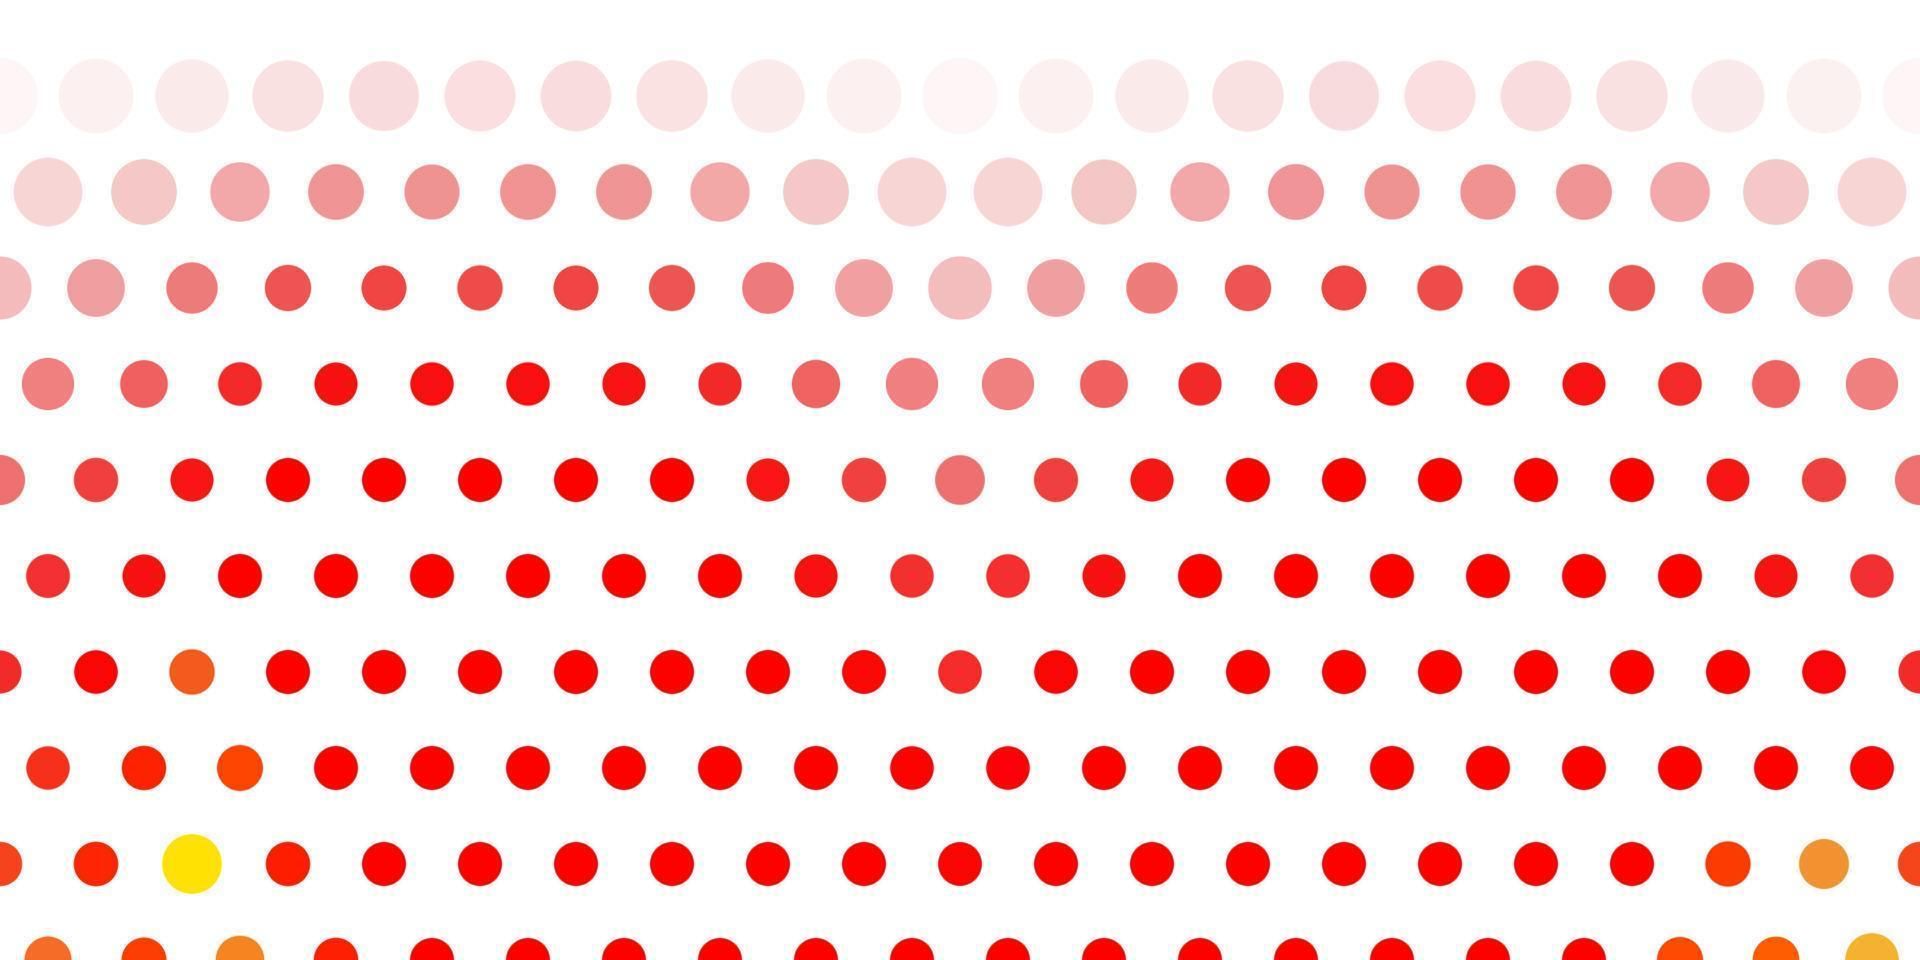 Light red vector layout with circle shapes.